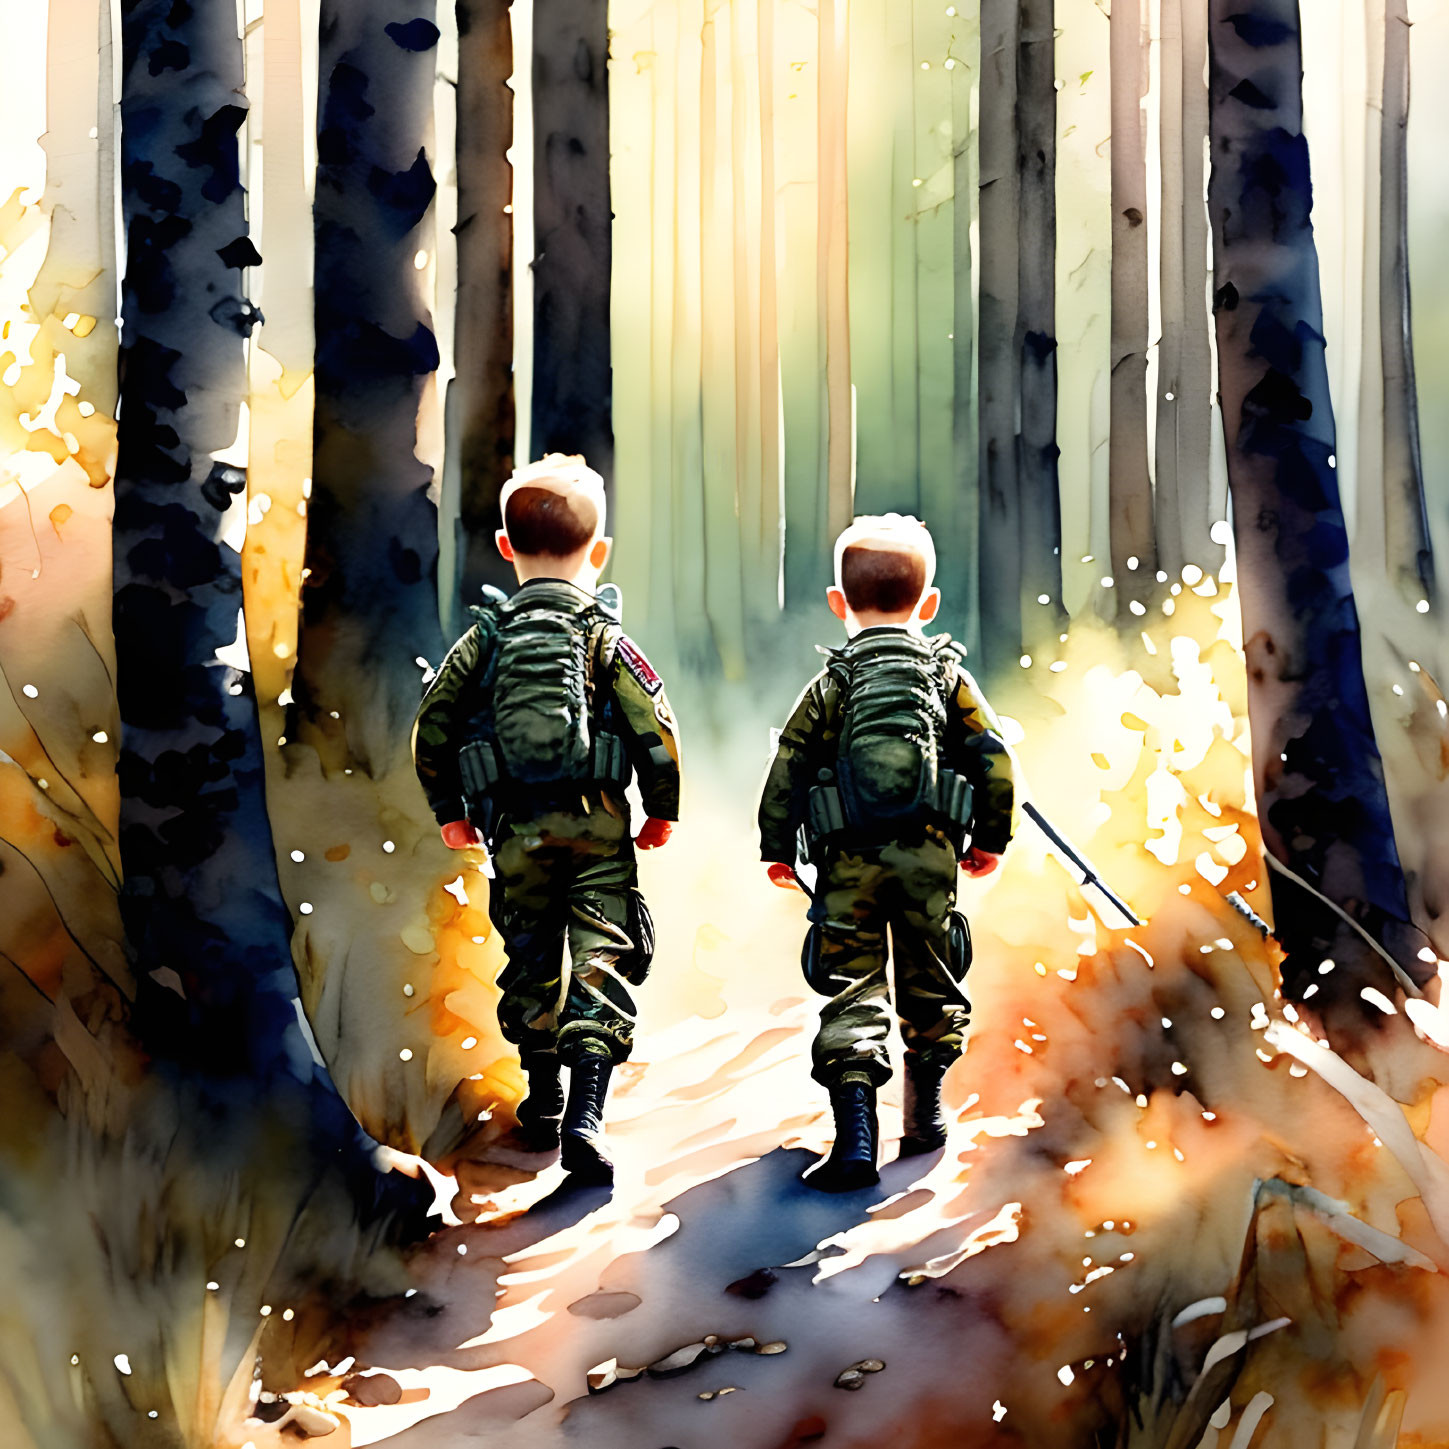 Children in military-style outfits walking in sunlit forest with tall trees.